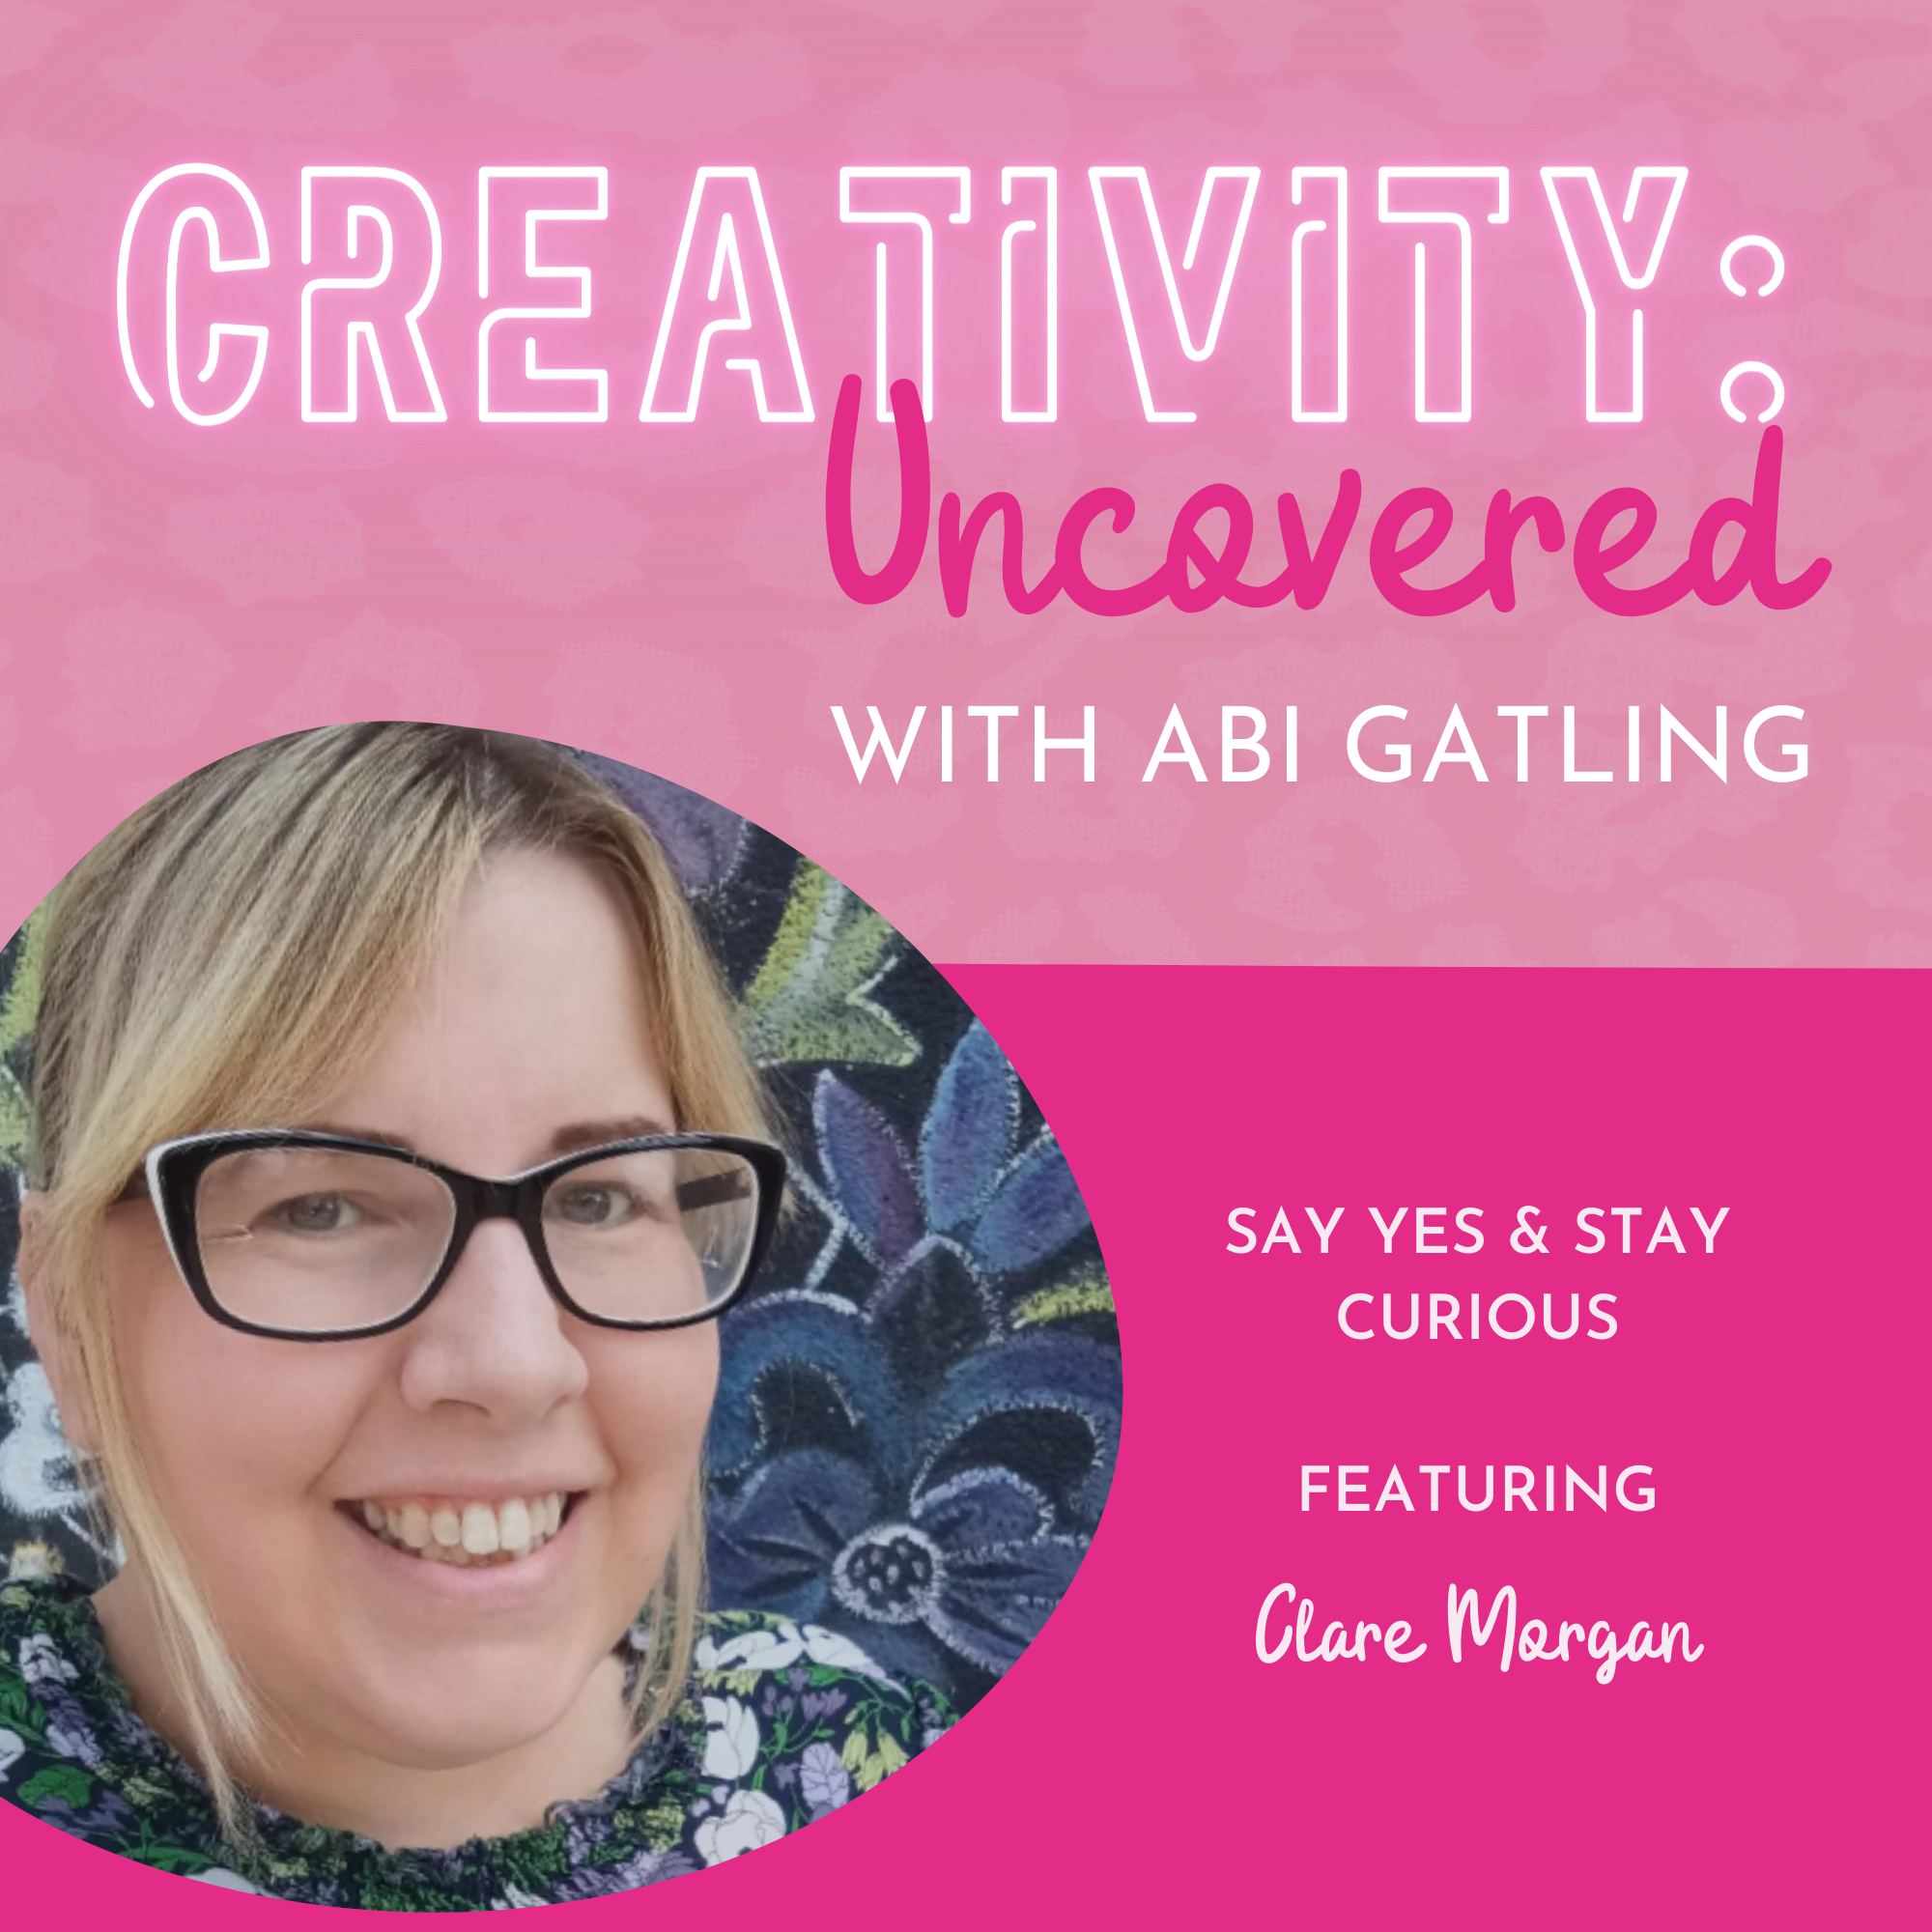 Creativity: Uncovered podcast episode graphic featuring guest Clare Morgan